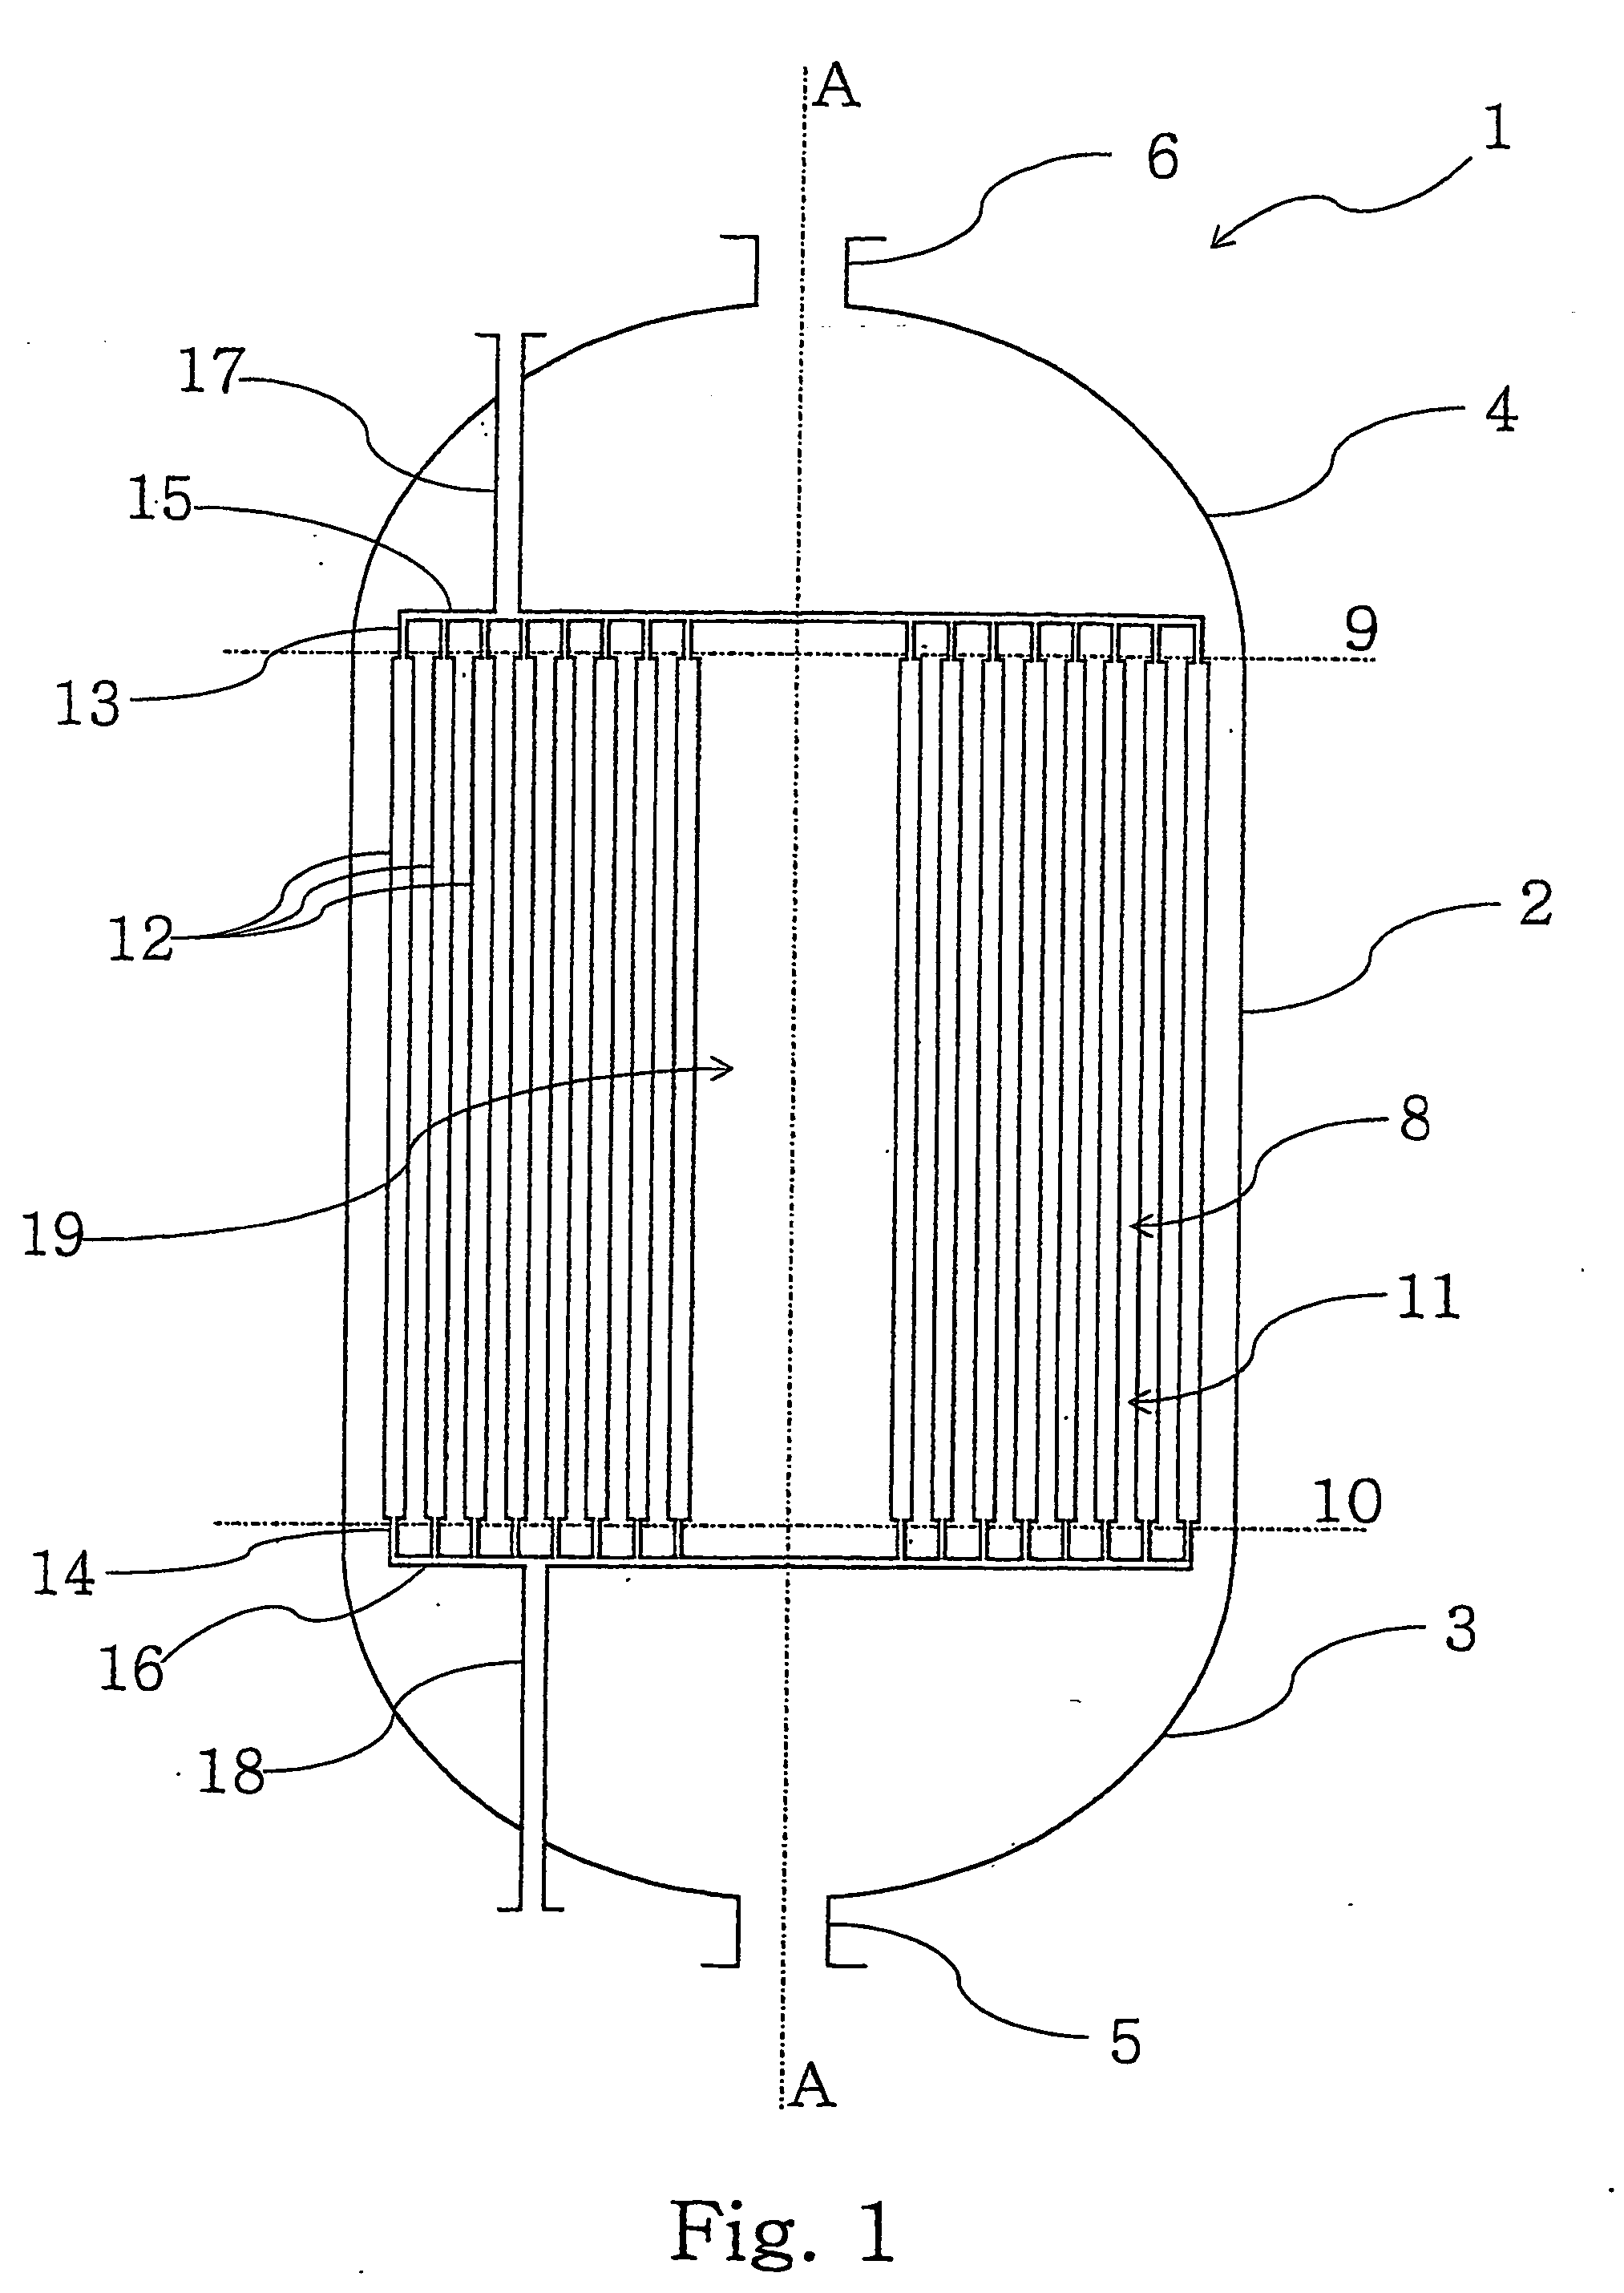 Pseudo-isothermal catalytic reactor